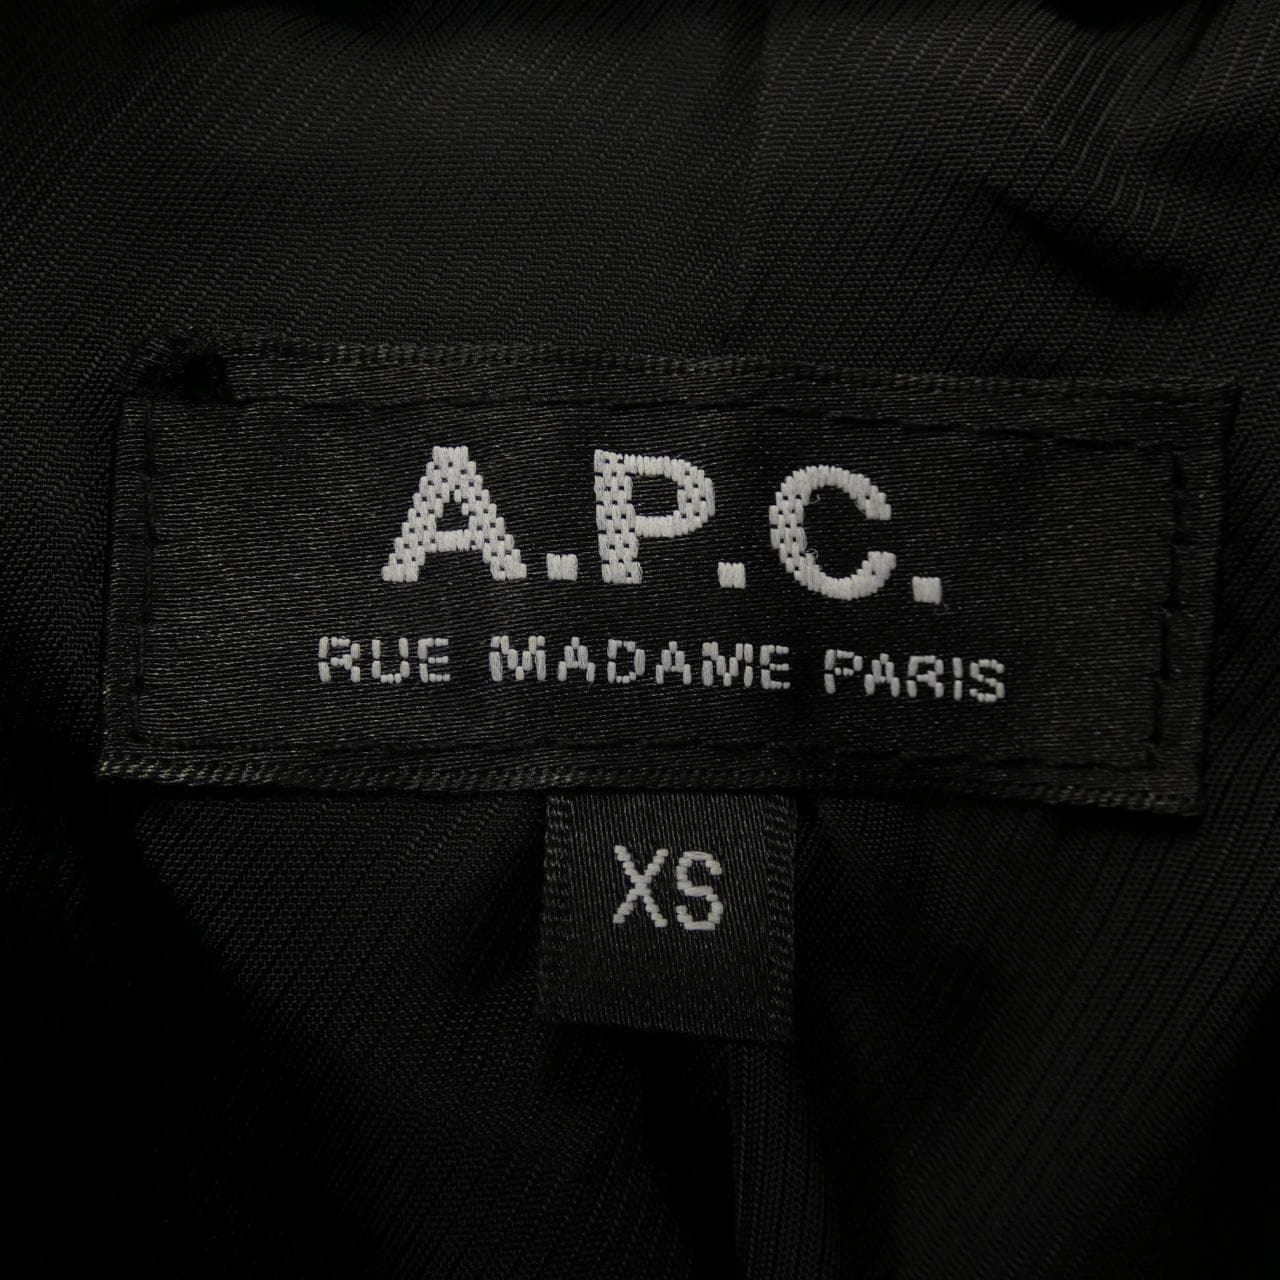 A.P.C Leather Jacket